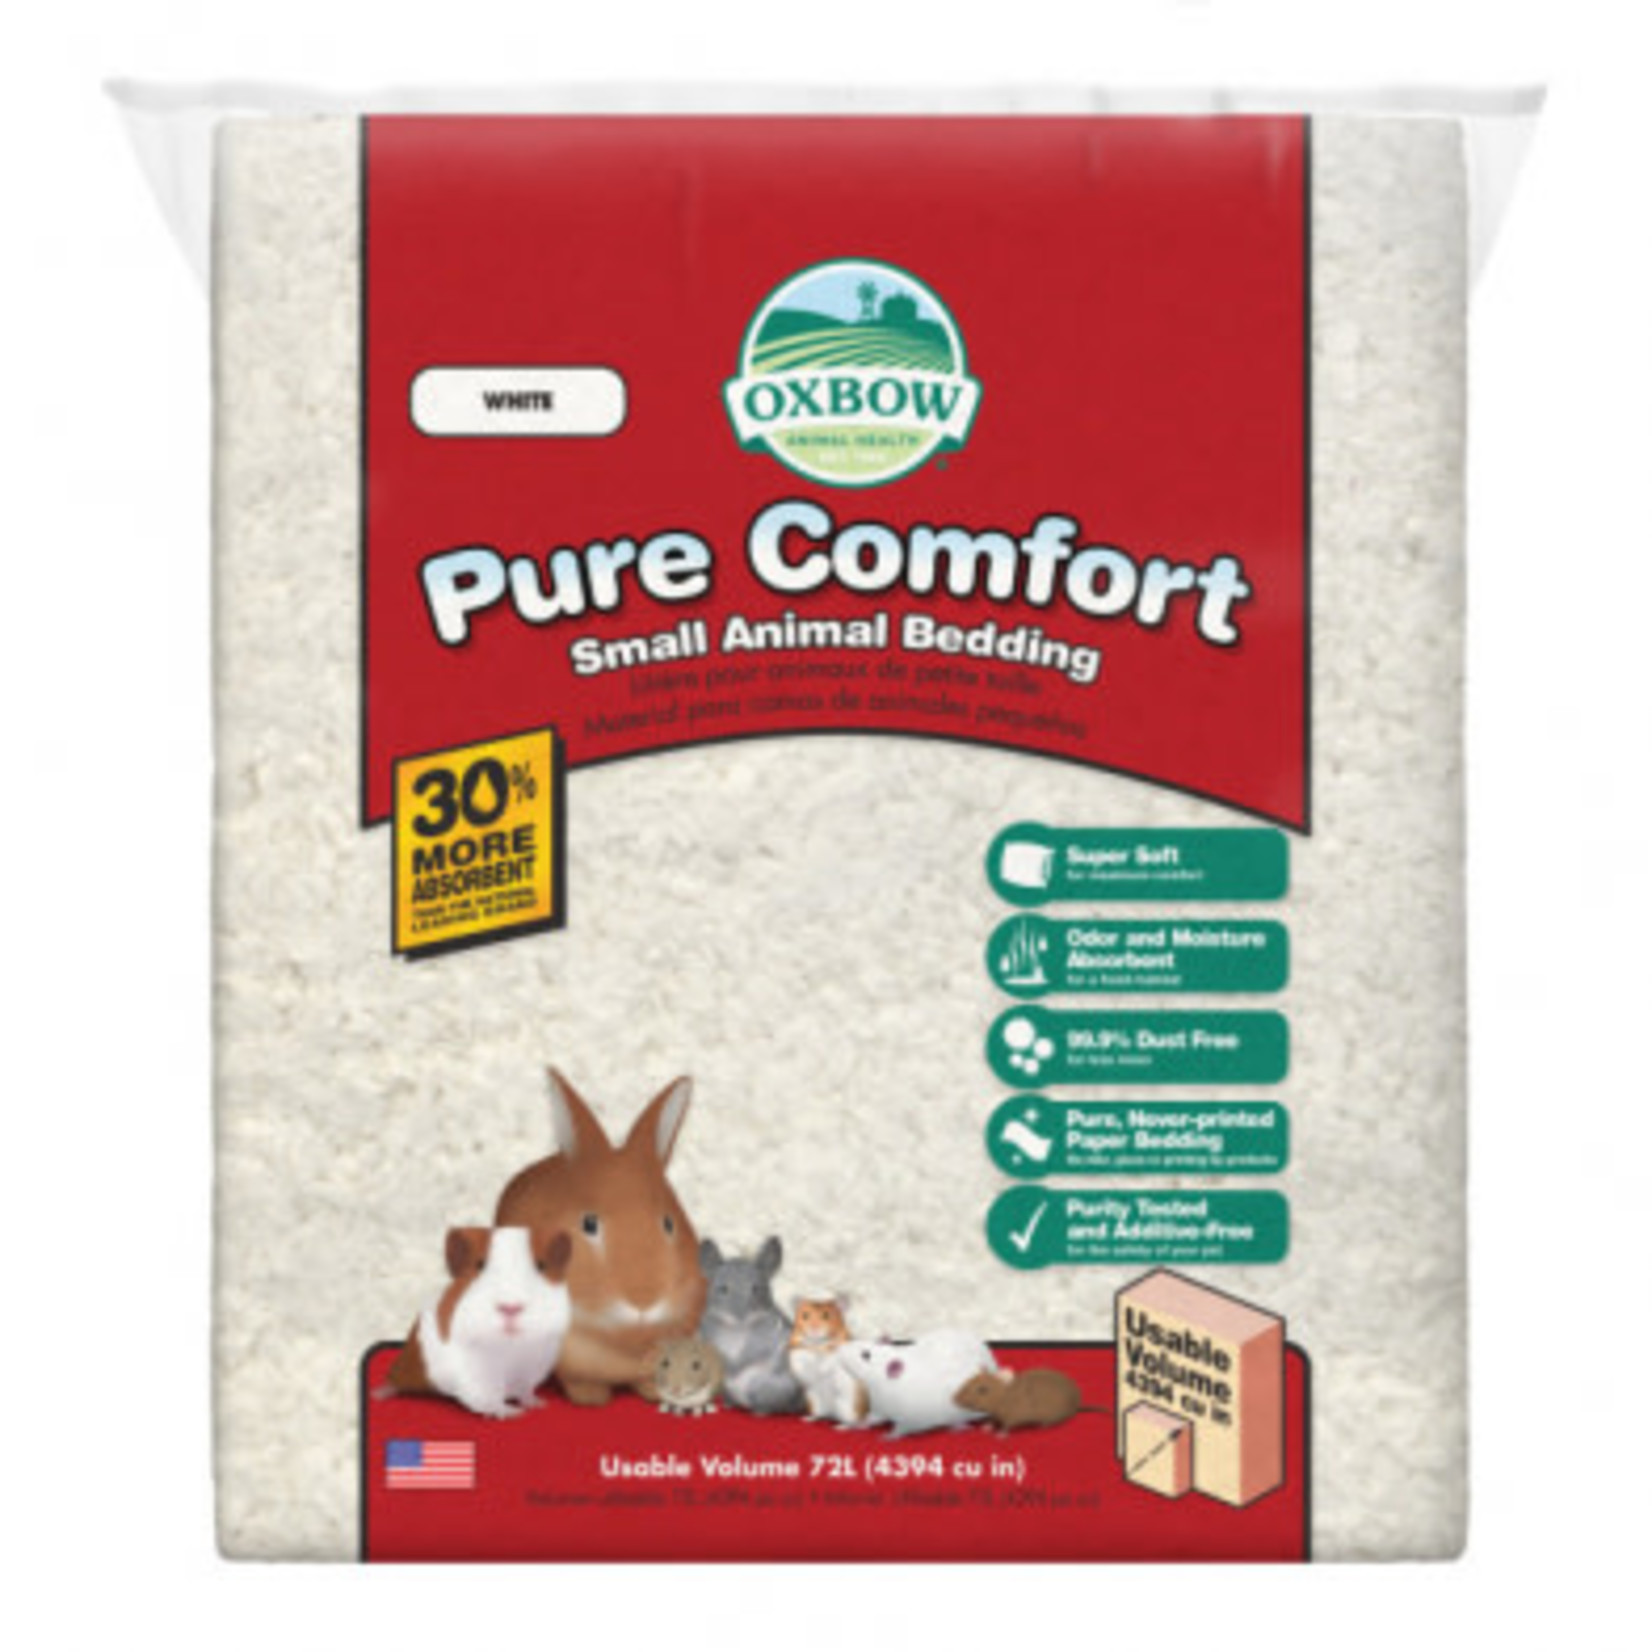 OXBOW ANIMAL HEALTH Oxbow Pure Comfort Bedding - White 72L